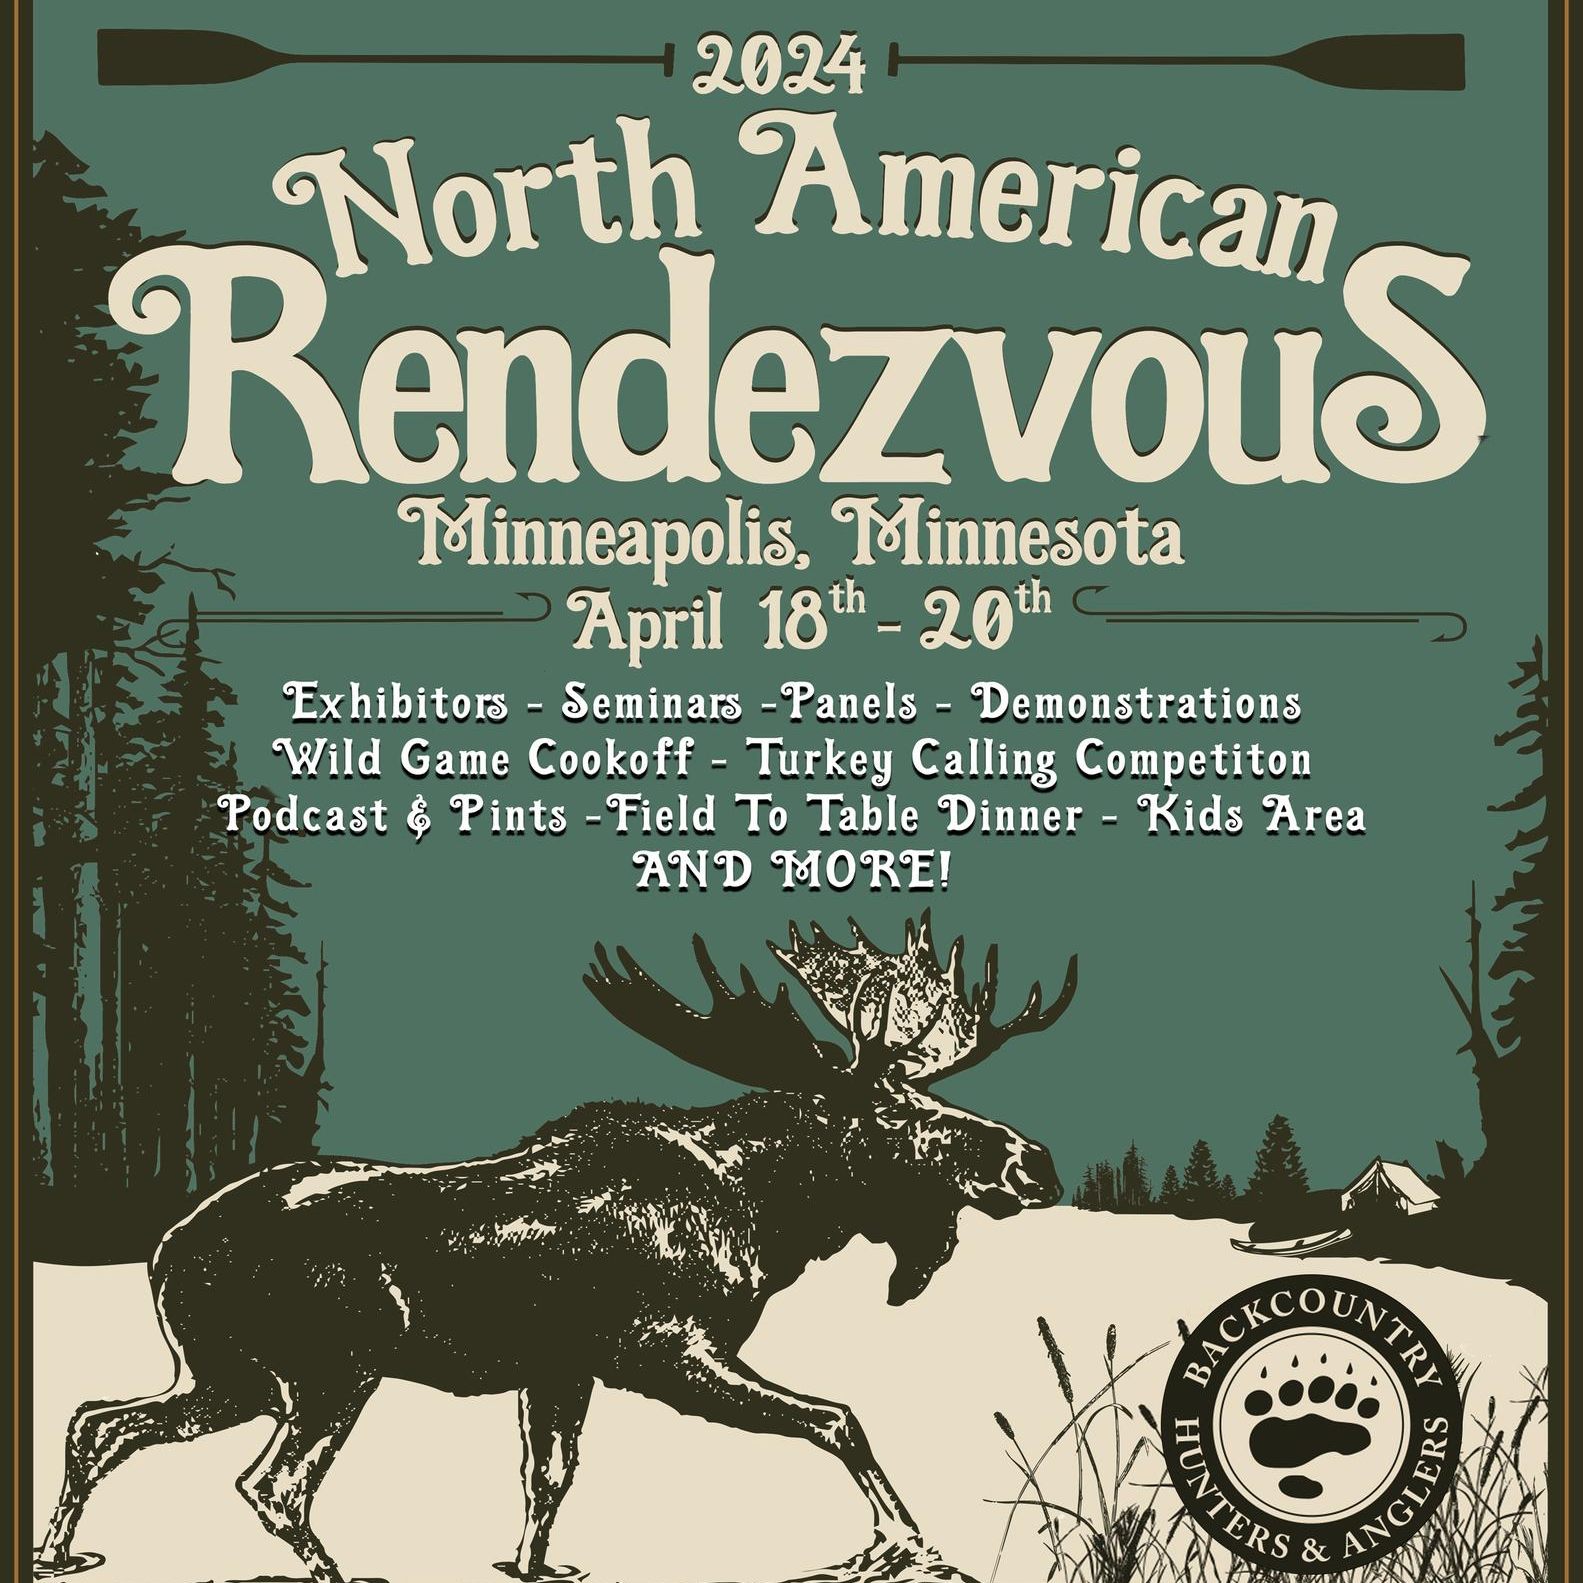 If you hear sounds of the outdoors in downtown Minneapolis next week, there’s a good reason for it. For the first time in its history, Upstream Partner Backcountry Hunters & Anglers will be holding its annual Rendezvous event east of the Mississippi, in Minneapolis. The expansive gathering of hunters, anglers and outdoorspeople will happen April 18-20 at the Minneapolis Convention Center and other sites around the Twin Cities. Learn more: rendezvous.backcountryhunters.org — from Instagram